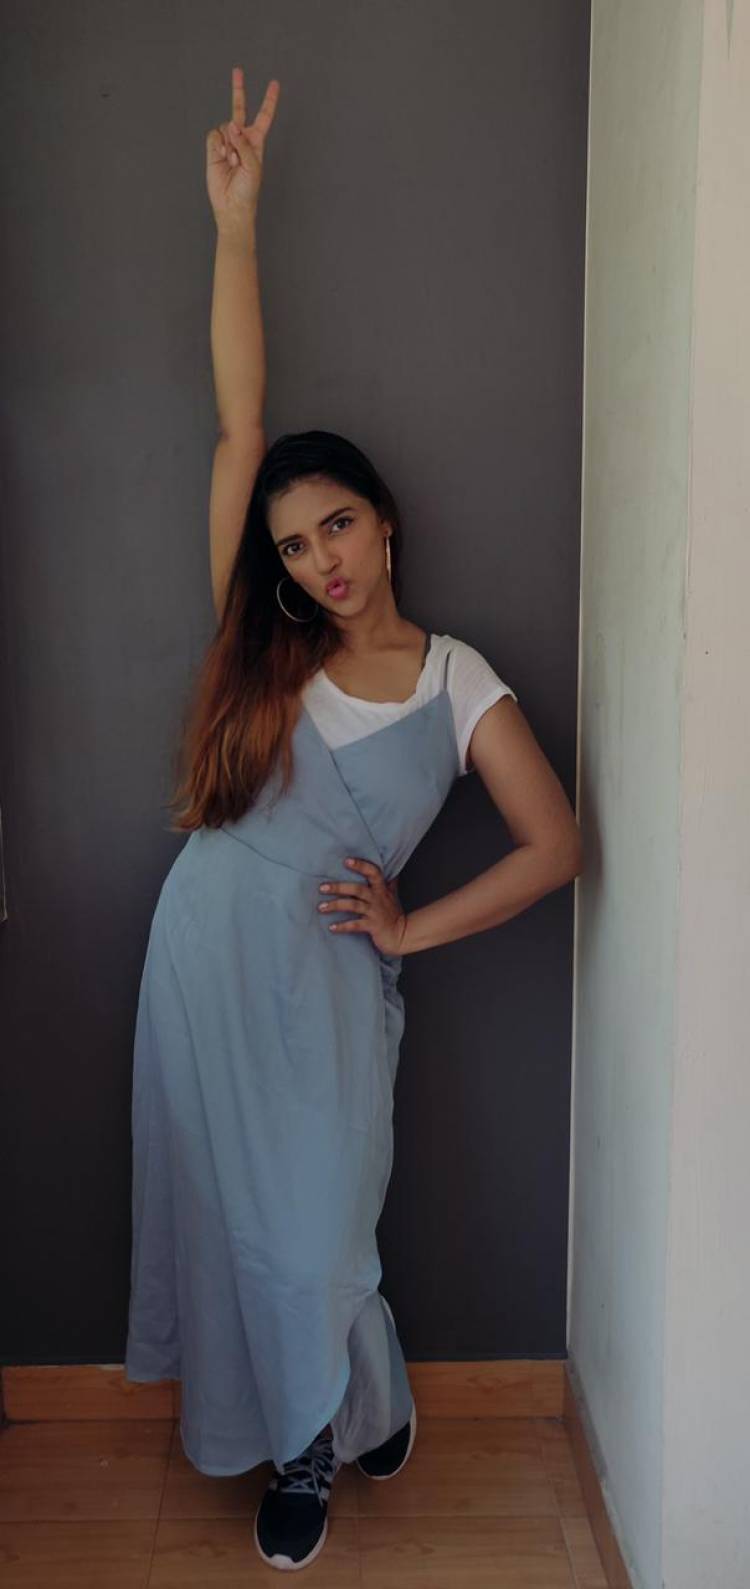 Rockin’ blue to beat the blues! Just casual clicks of Actress @ivasuuu